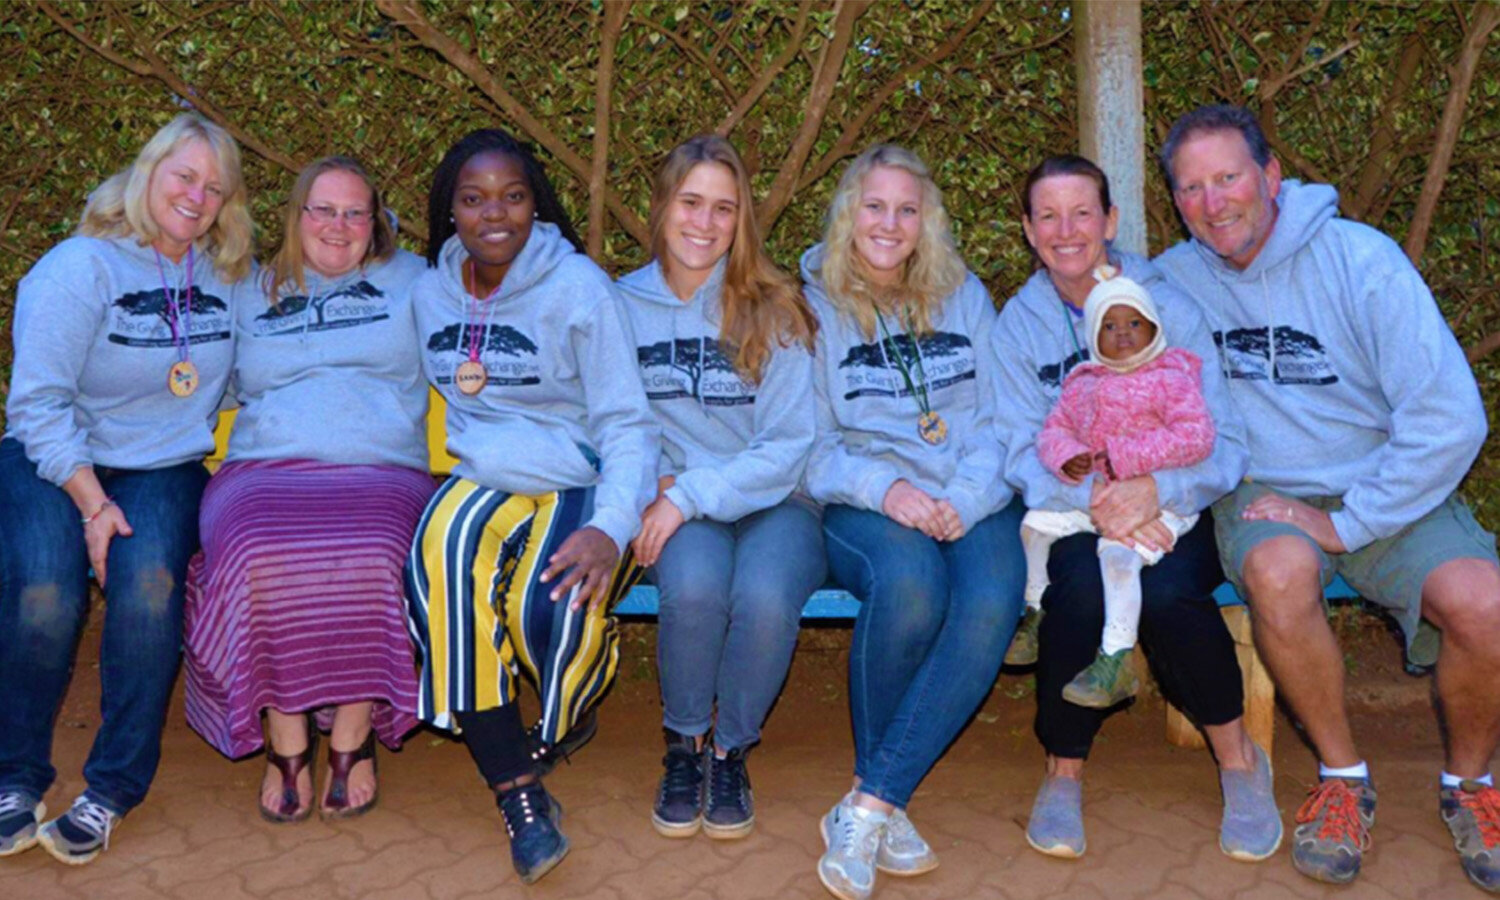   The week three team visited several children’s homes during their Kenya trip.  